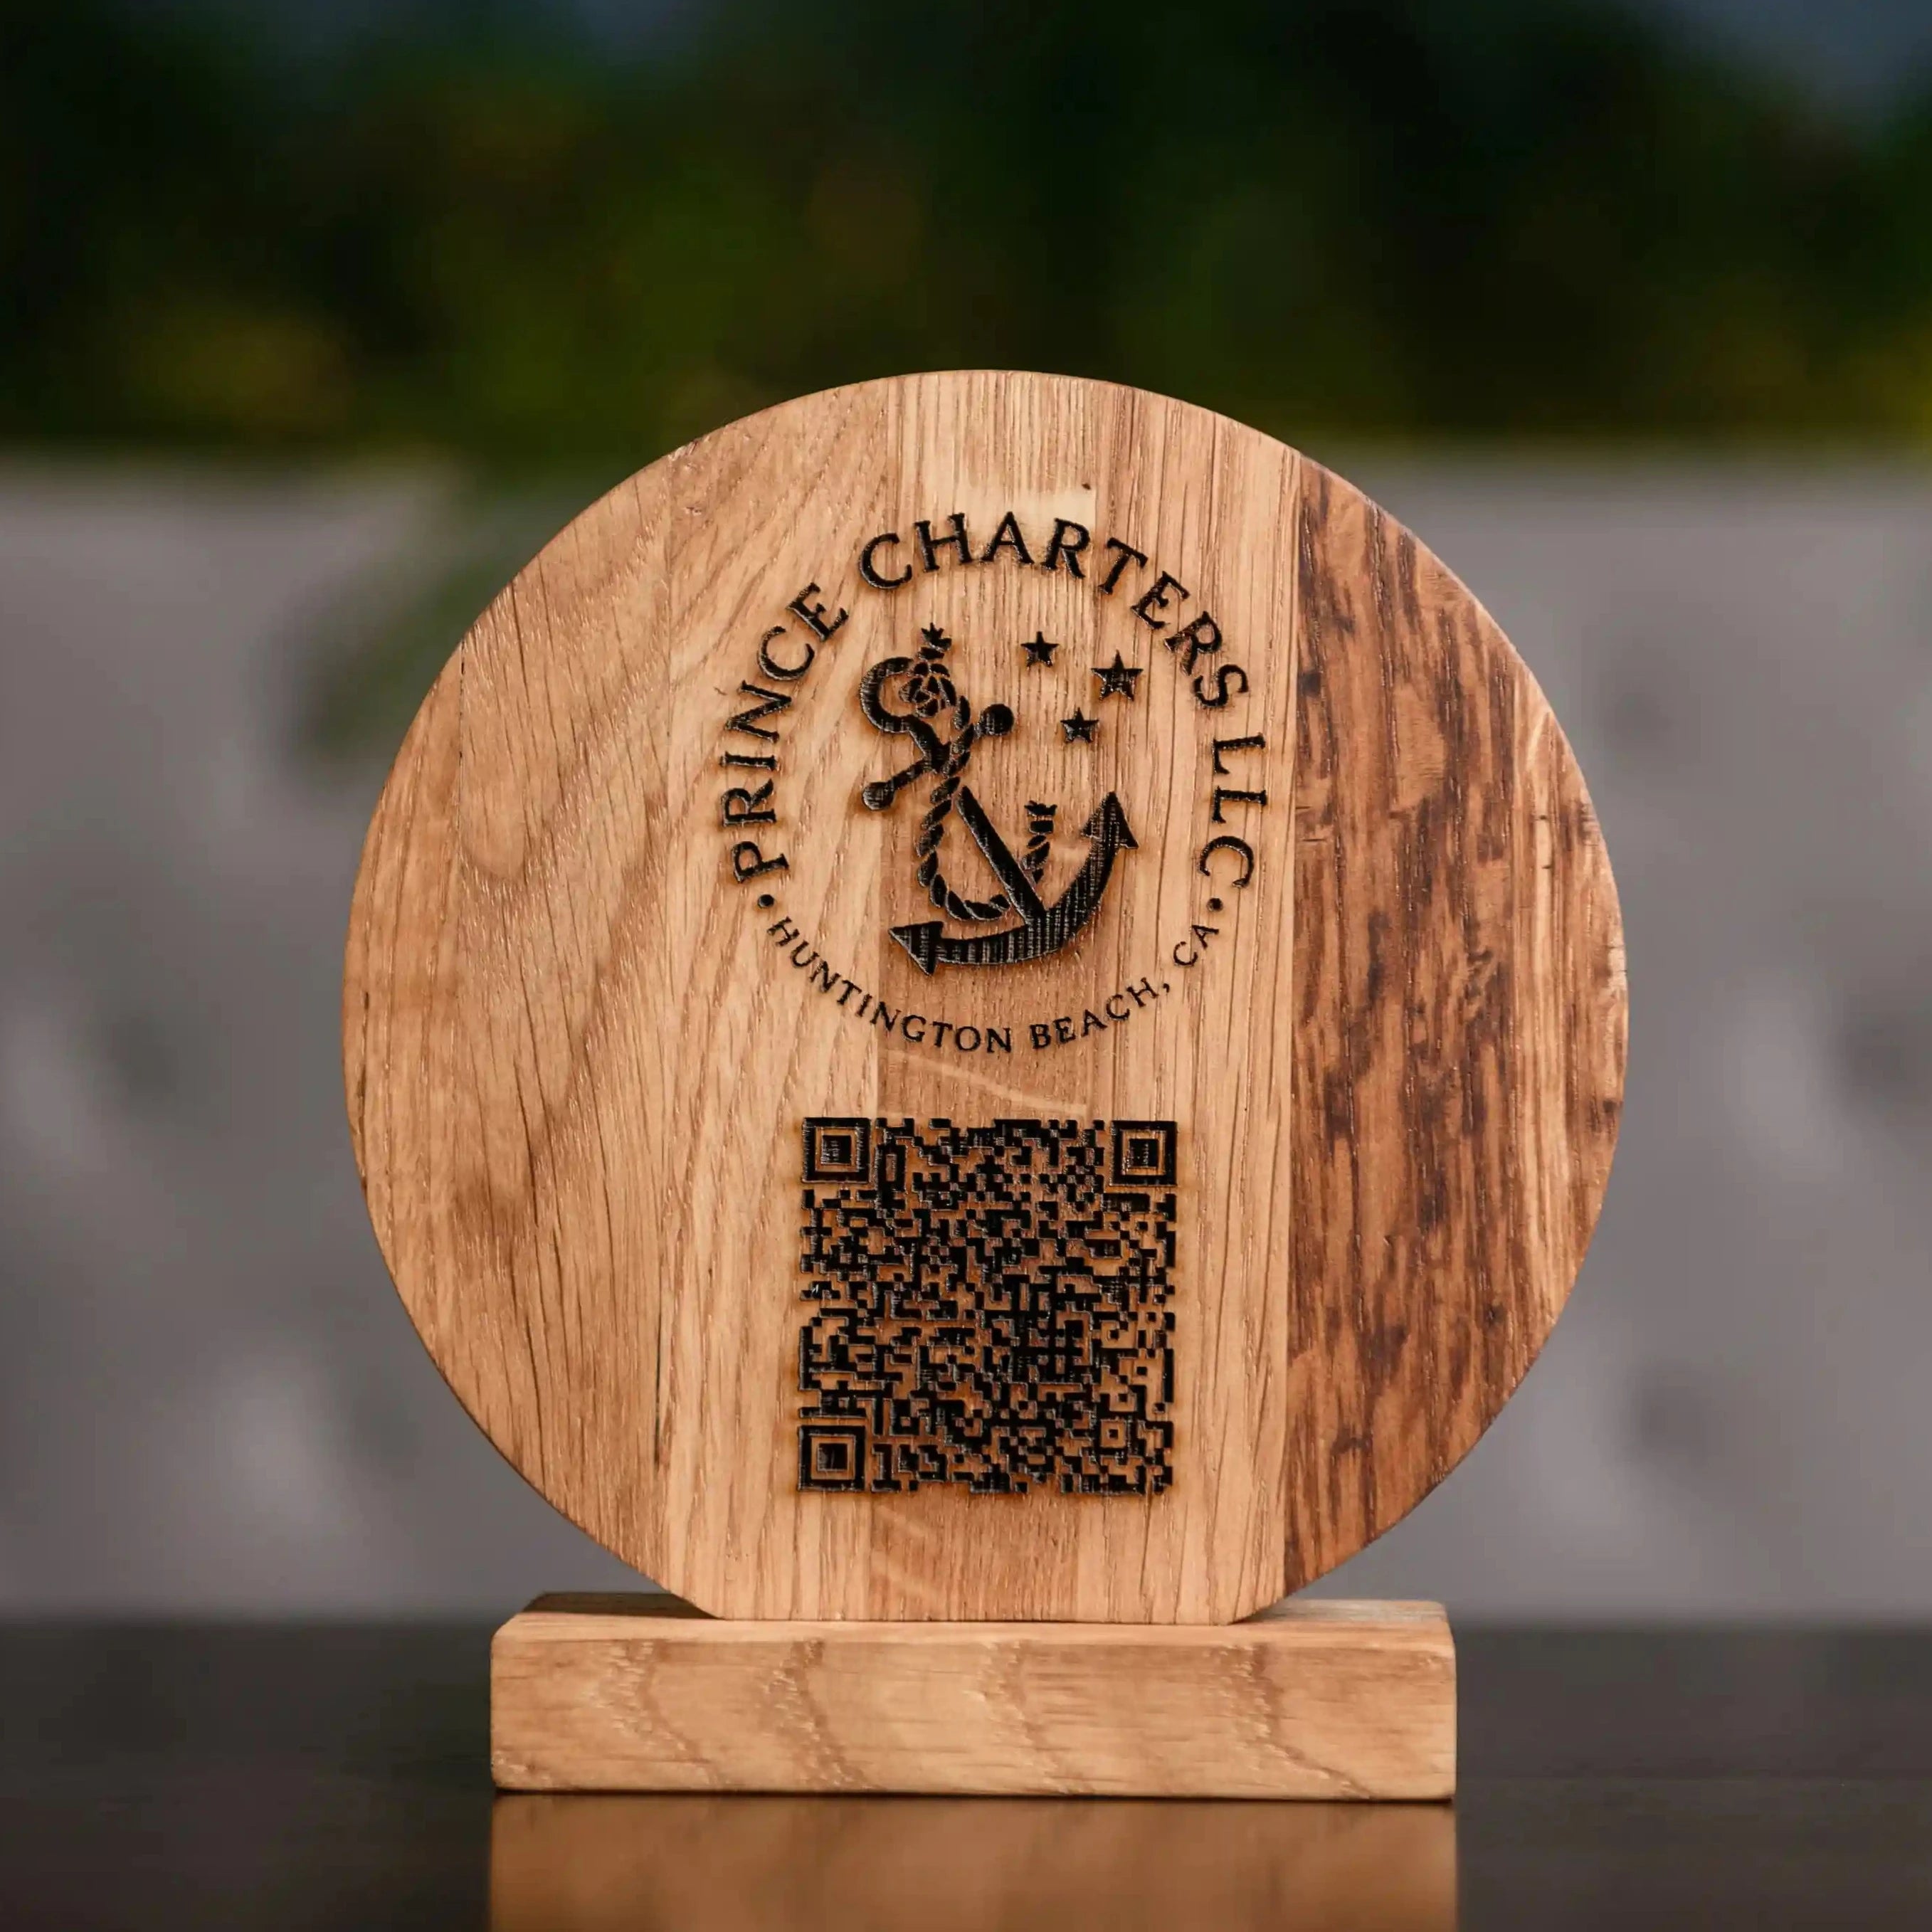 Beautifully crafted wooden menu display with engraved logo and QR code for a modern dining experience